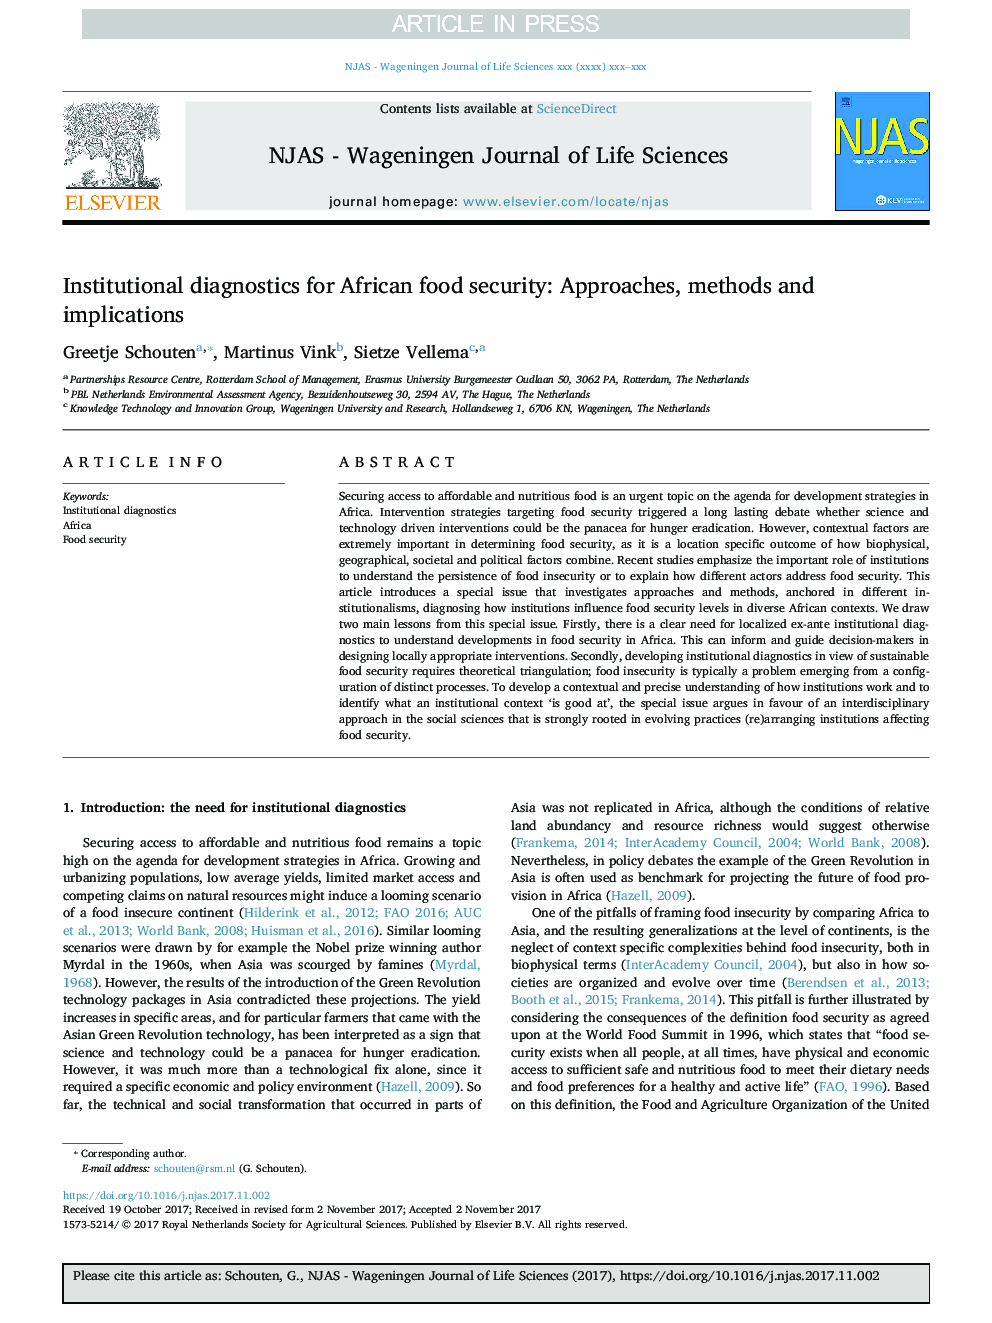 Institutional diagnostics for African food security: Approaches, methods and implications